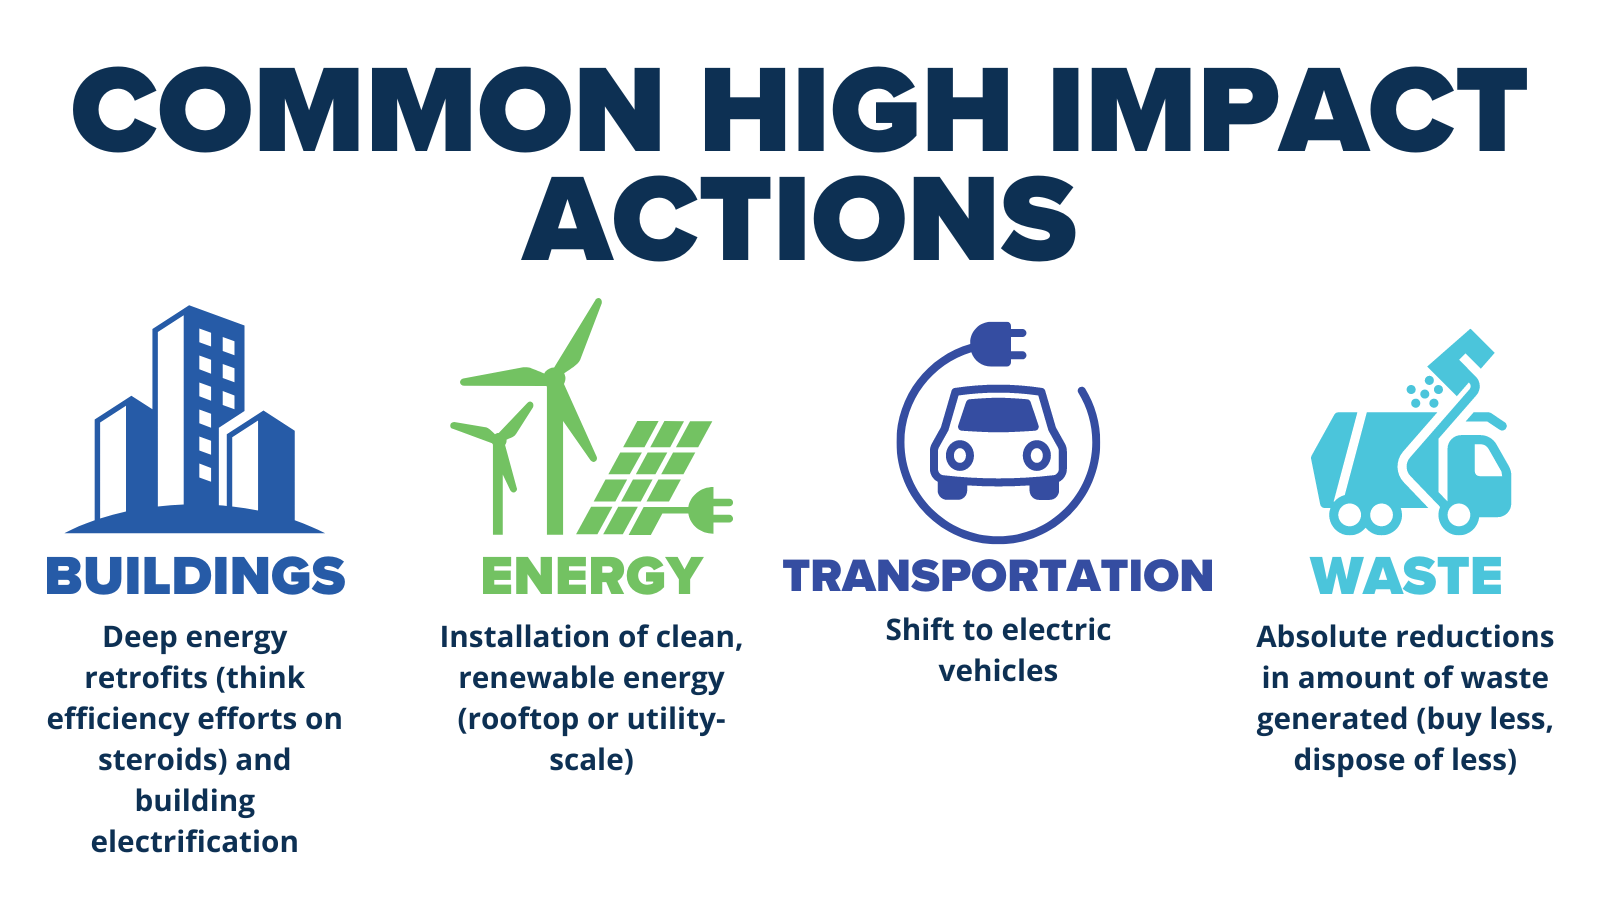 Common High Impact Actions: Buildings (Deep energy retrofits and building electrification), Energy (Installation of clean renewable energy), Transportation (Shift to electric vehicles), Waste (Absolute reduction in amount of waste generated)